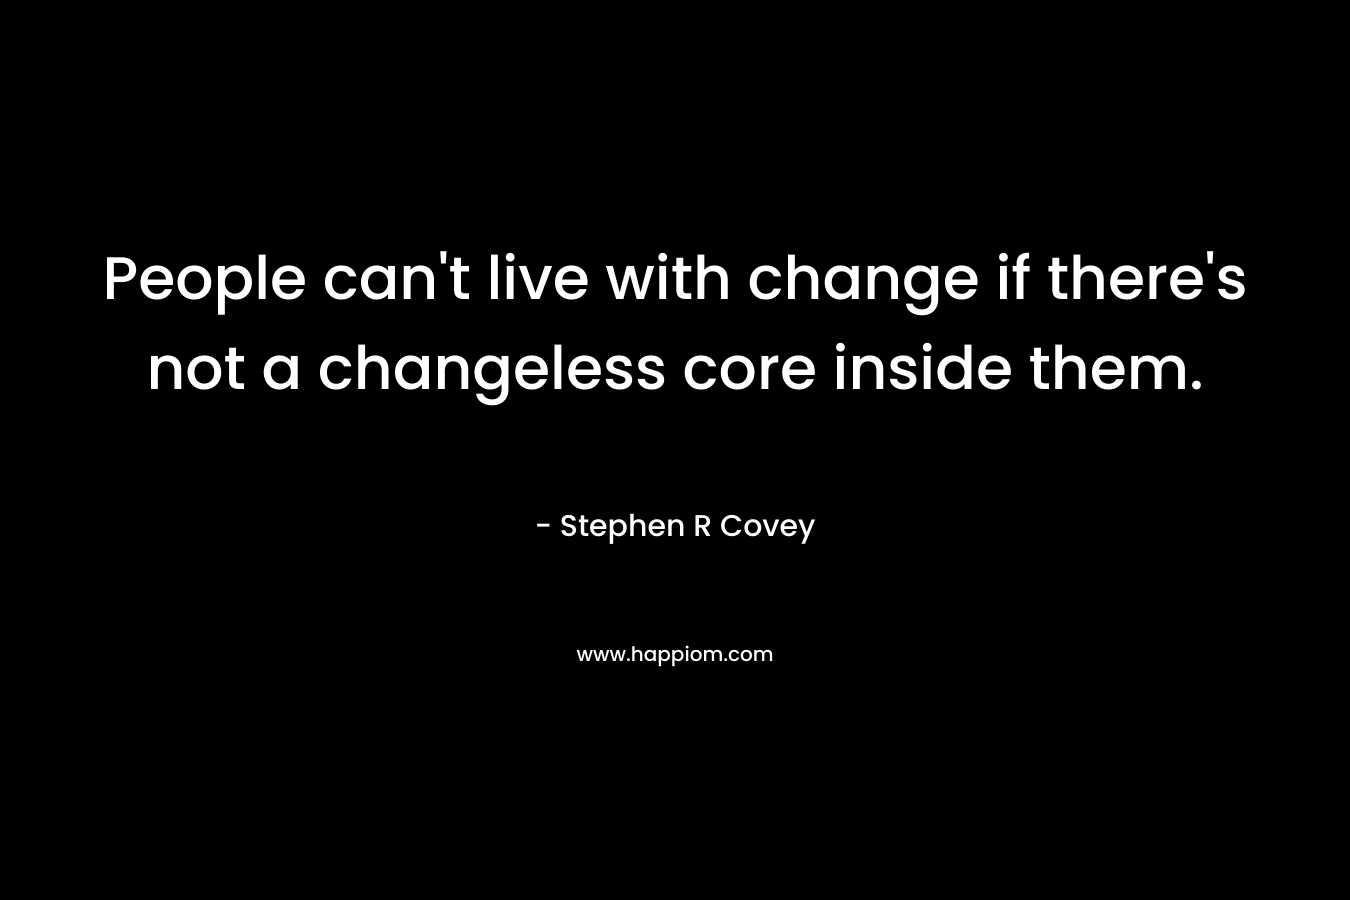 People can't live with change if there's not a changeless core inside them.